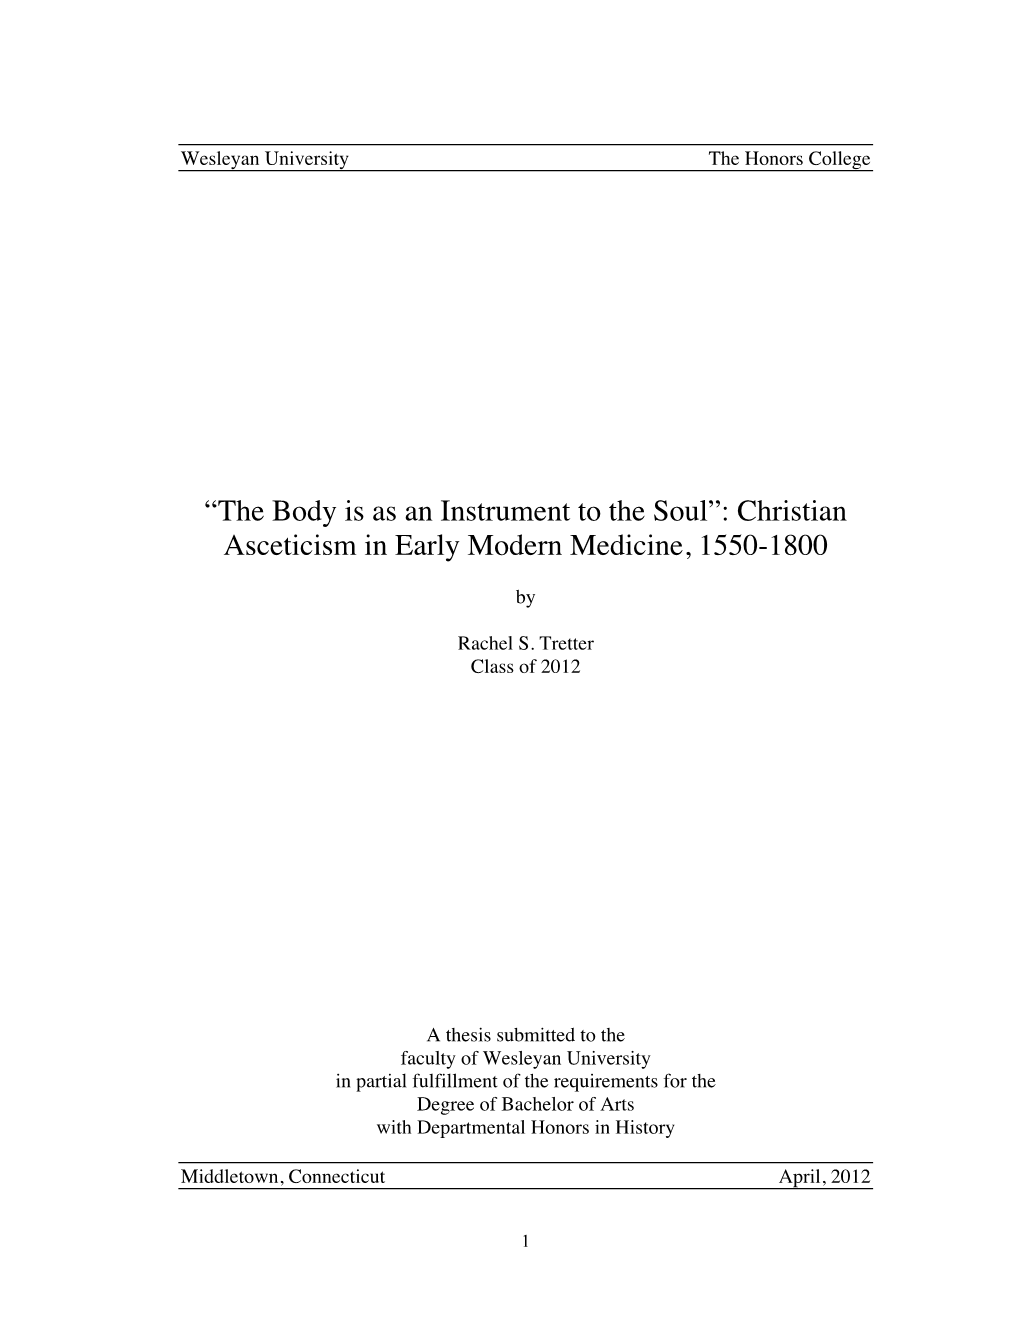 Christian Asceticism in Early Modern Medicine, 1550-1800